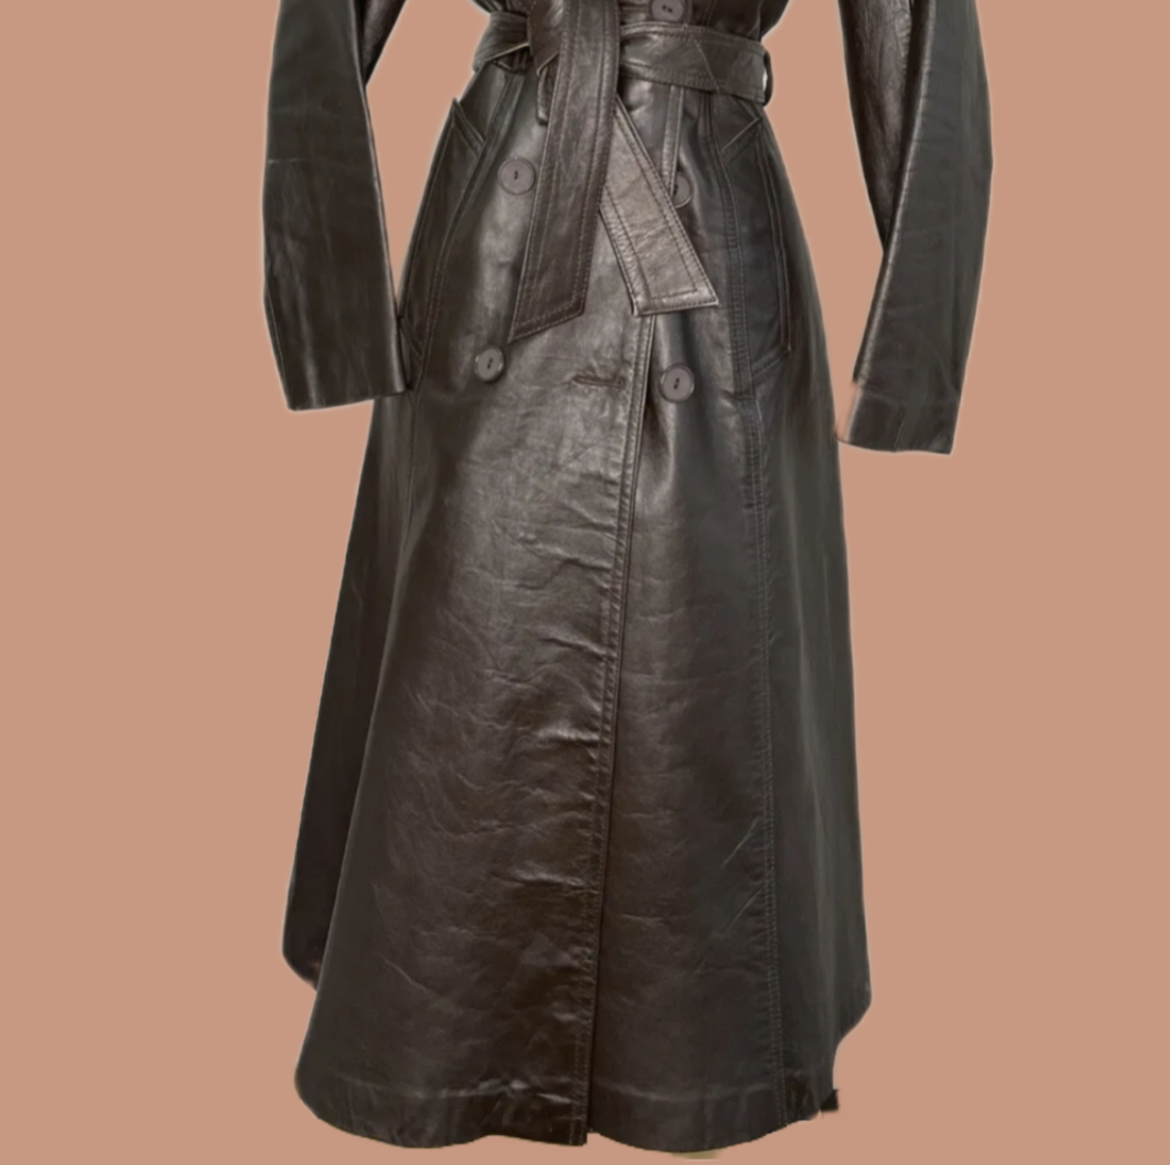 Vintage brown leather spy trench coat